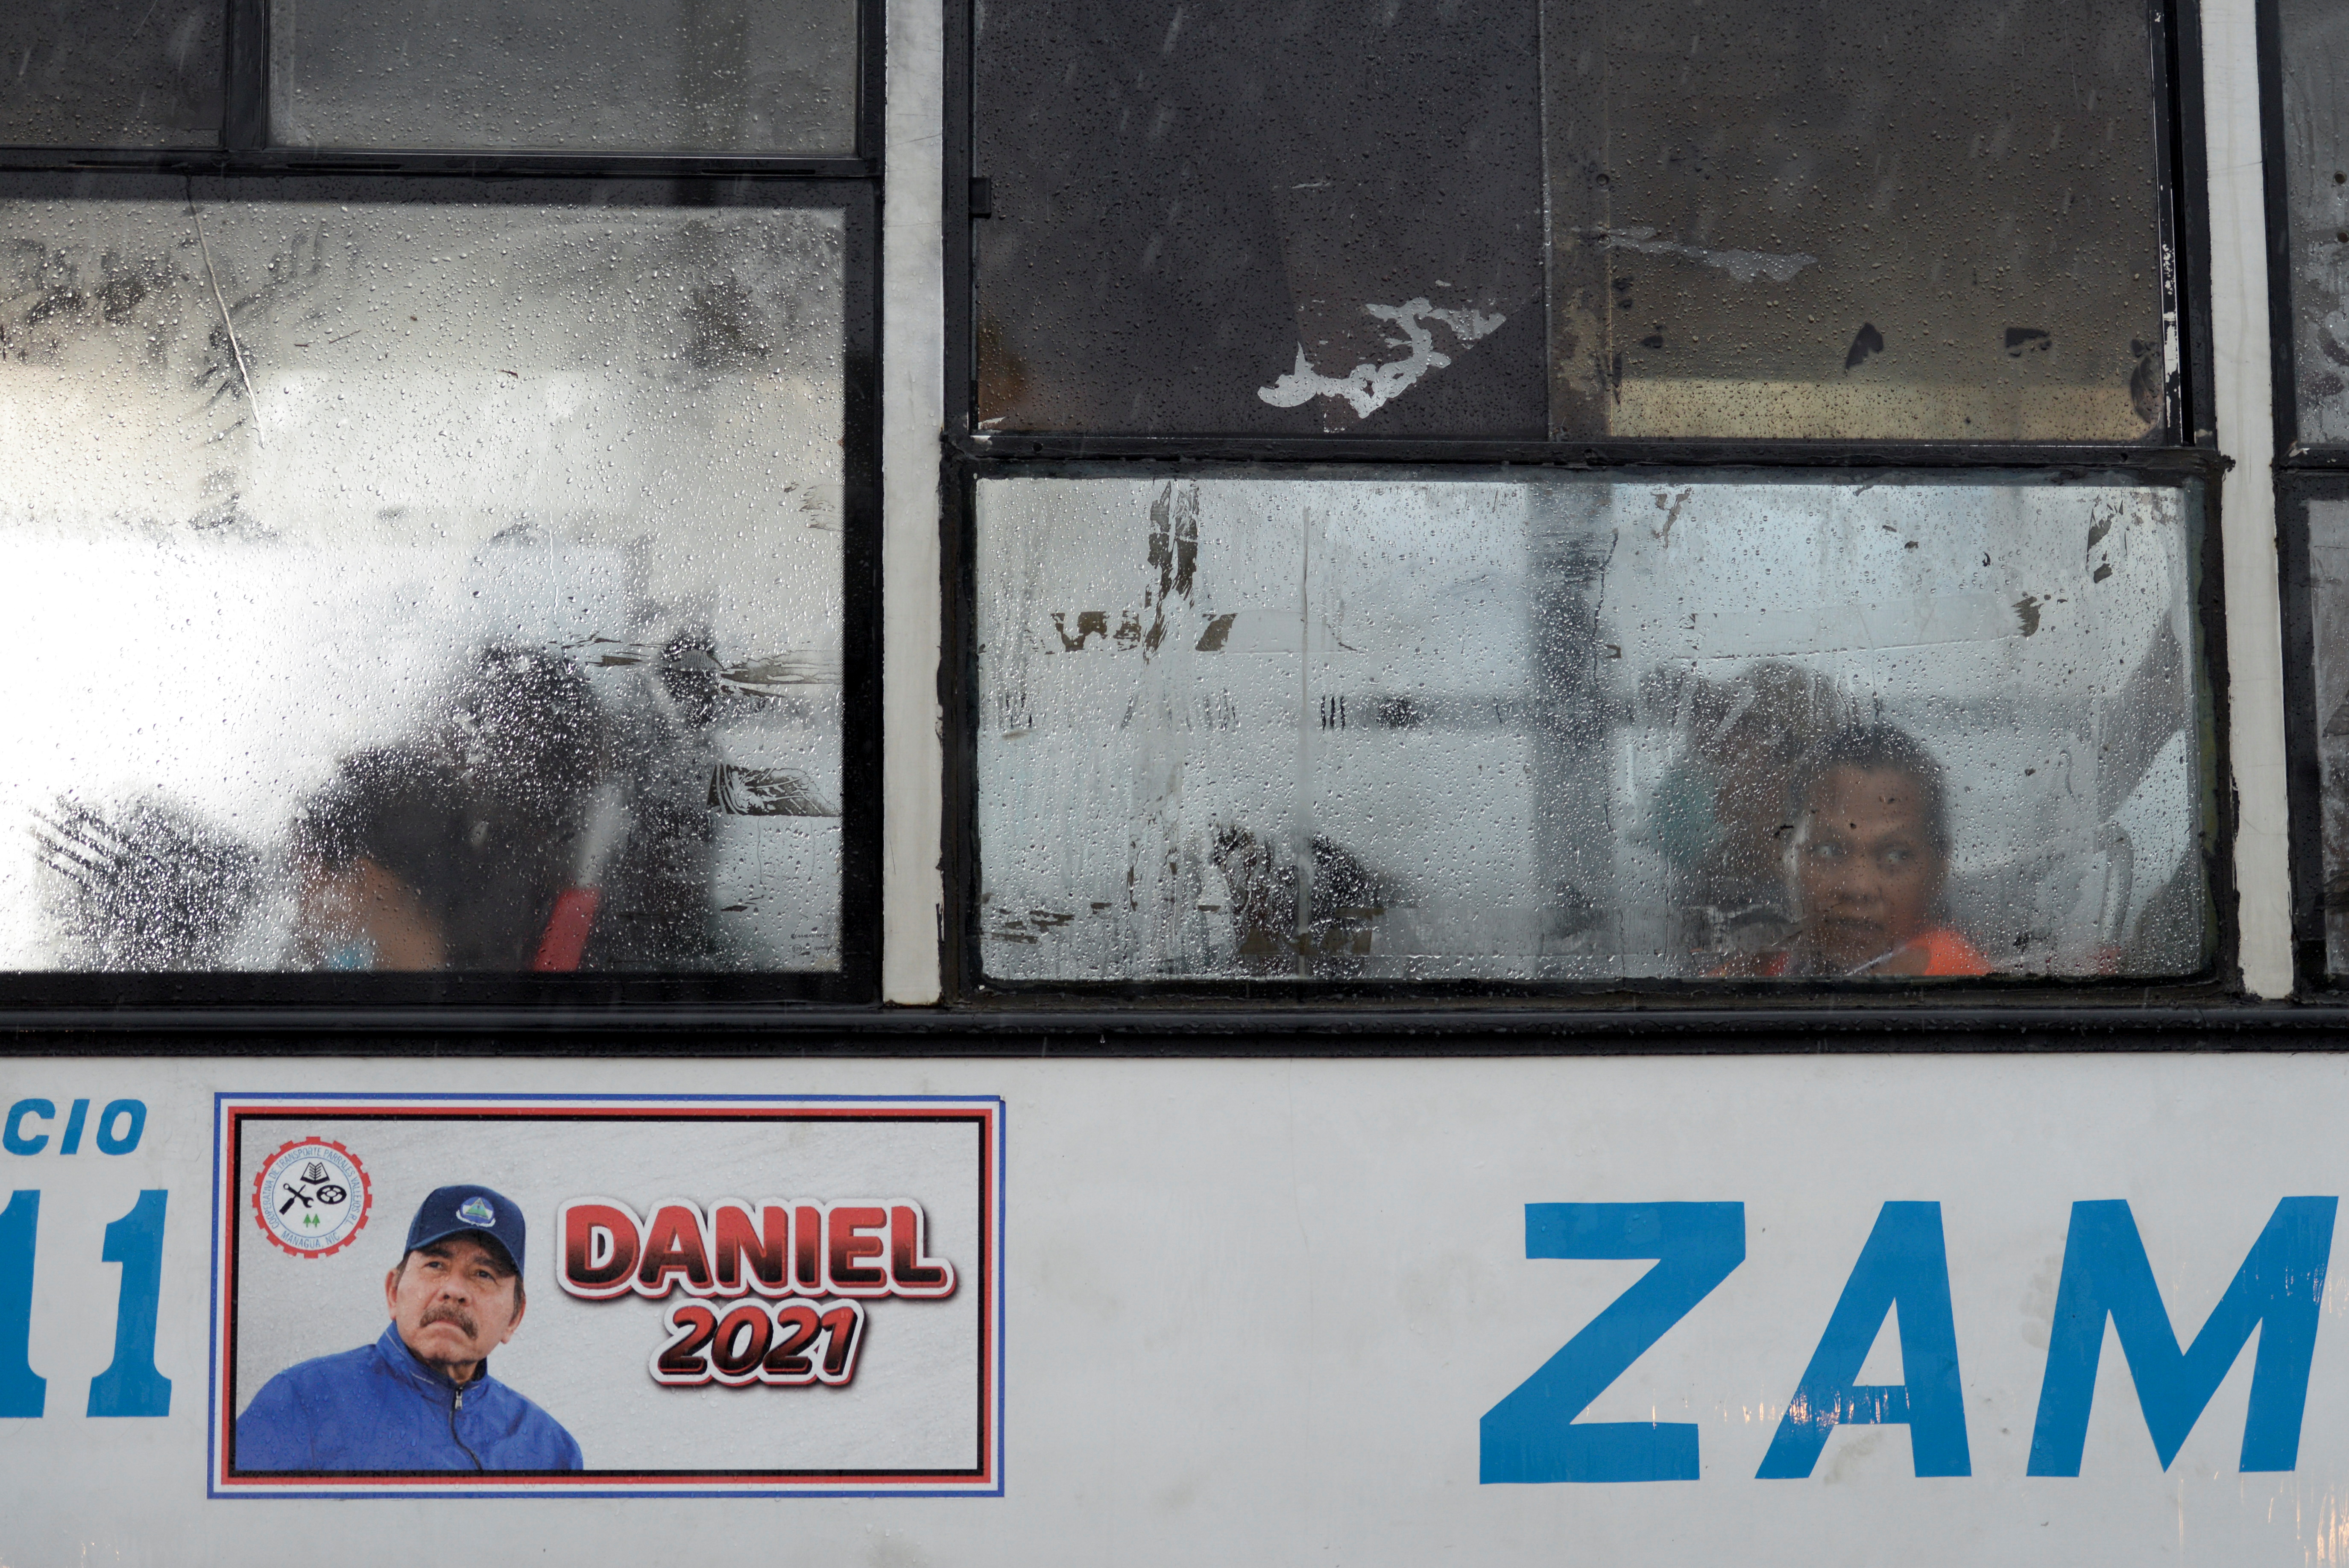 Sticker promoting candidacy of Nicaragua's President Ortega in 2021 election is pictured on bus in Managua